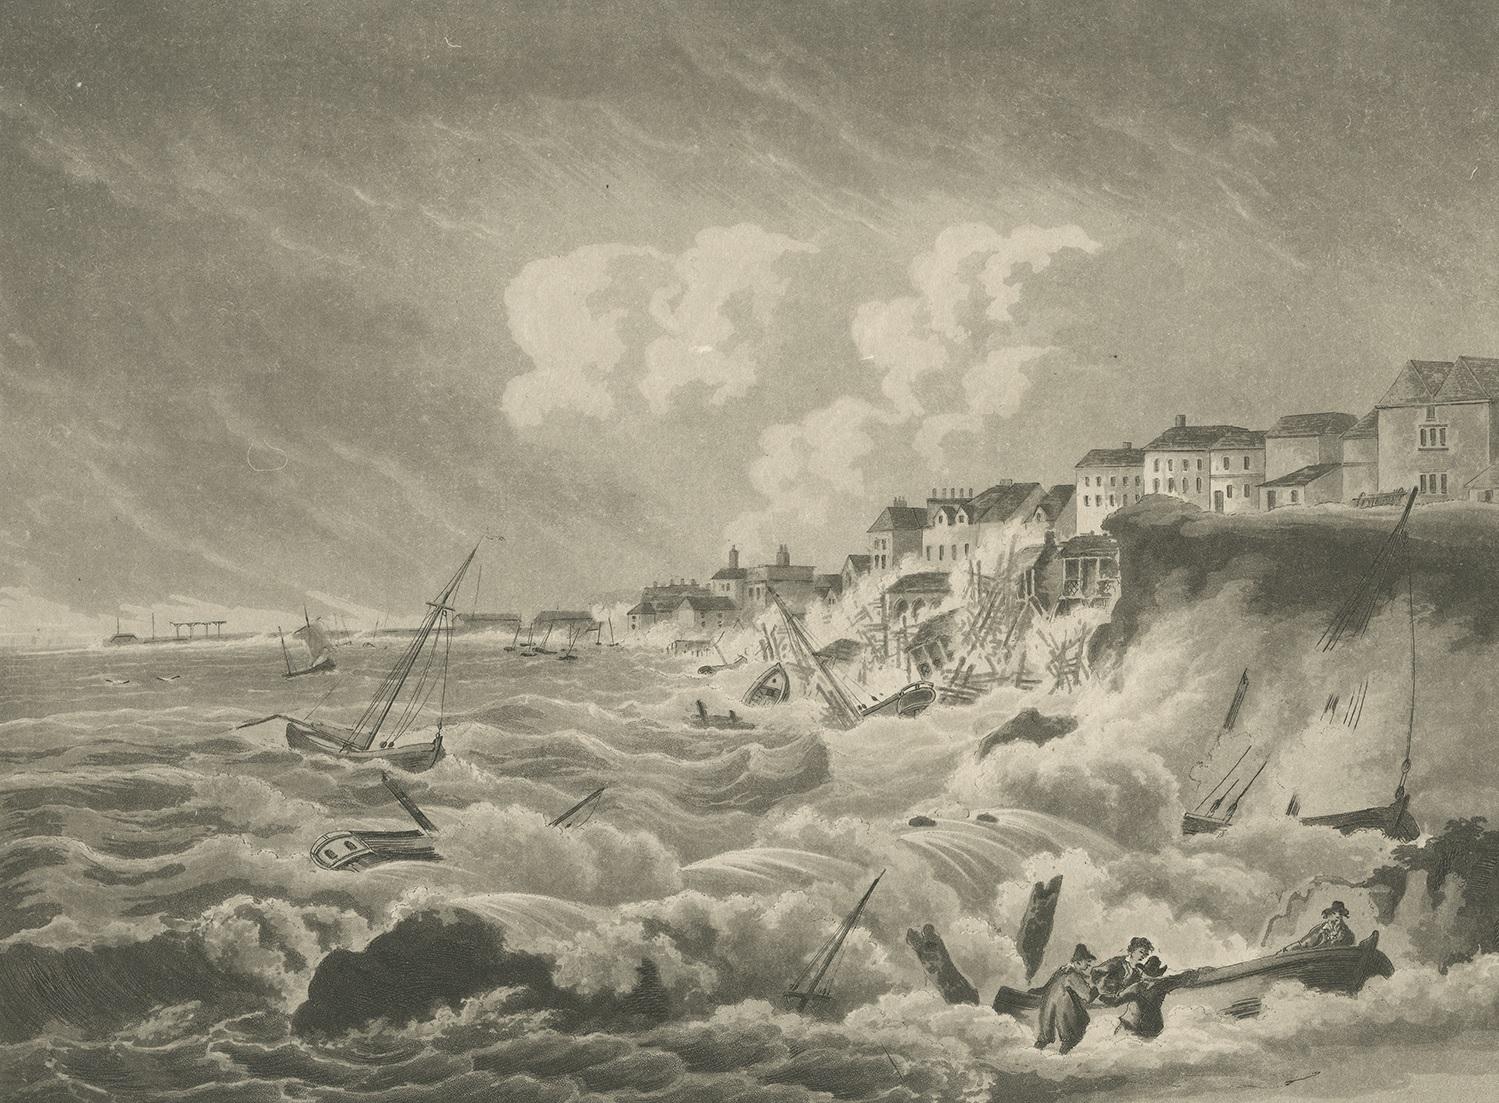 Antique print titled 'Representation of the Town of Margate'. View of Margate during the storm in 1808. Margate became a popular resort for the English
nobility in the 18th century. Drawn and aquatinted by J. Hassell, circa 1808.